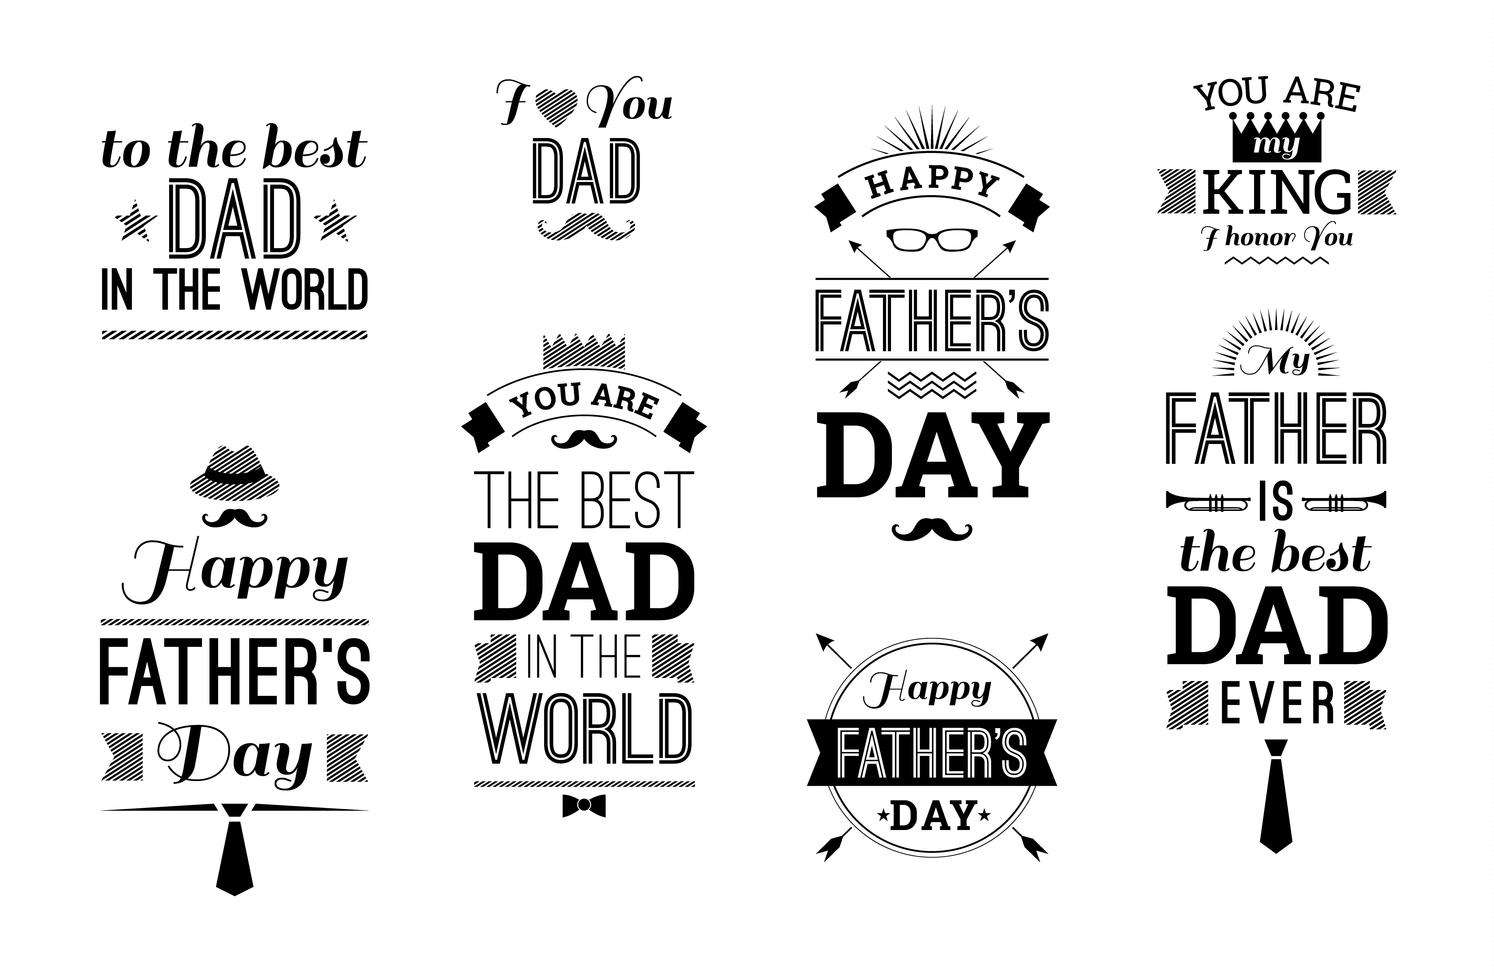 Happy Father s Day Design Collection In Retro Style. 295342 Vector Art ...